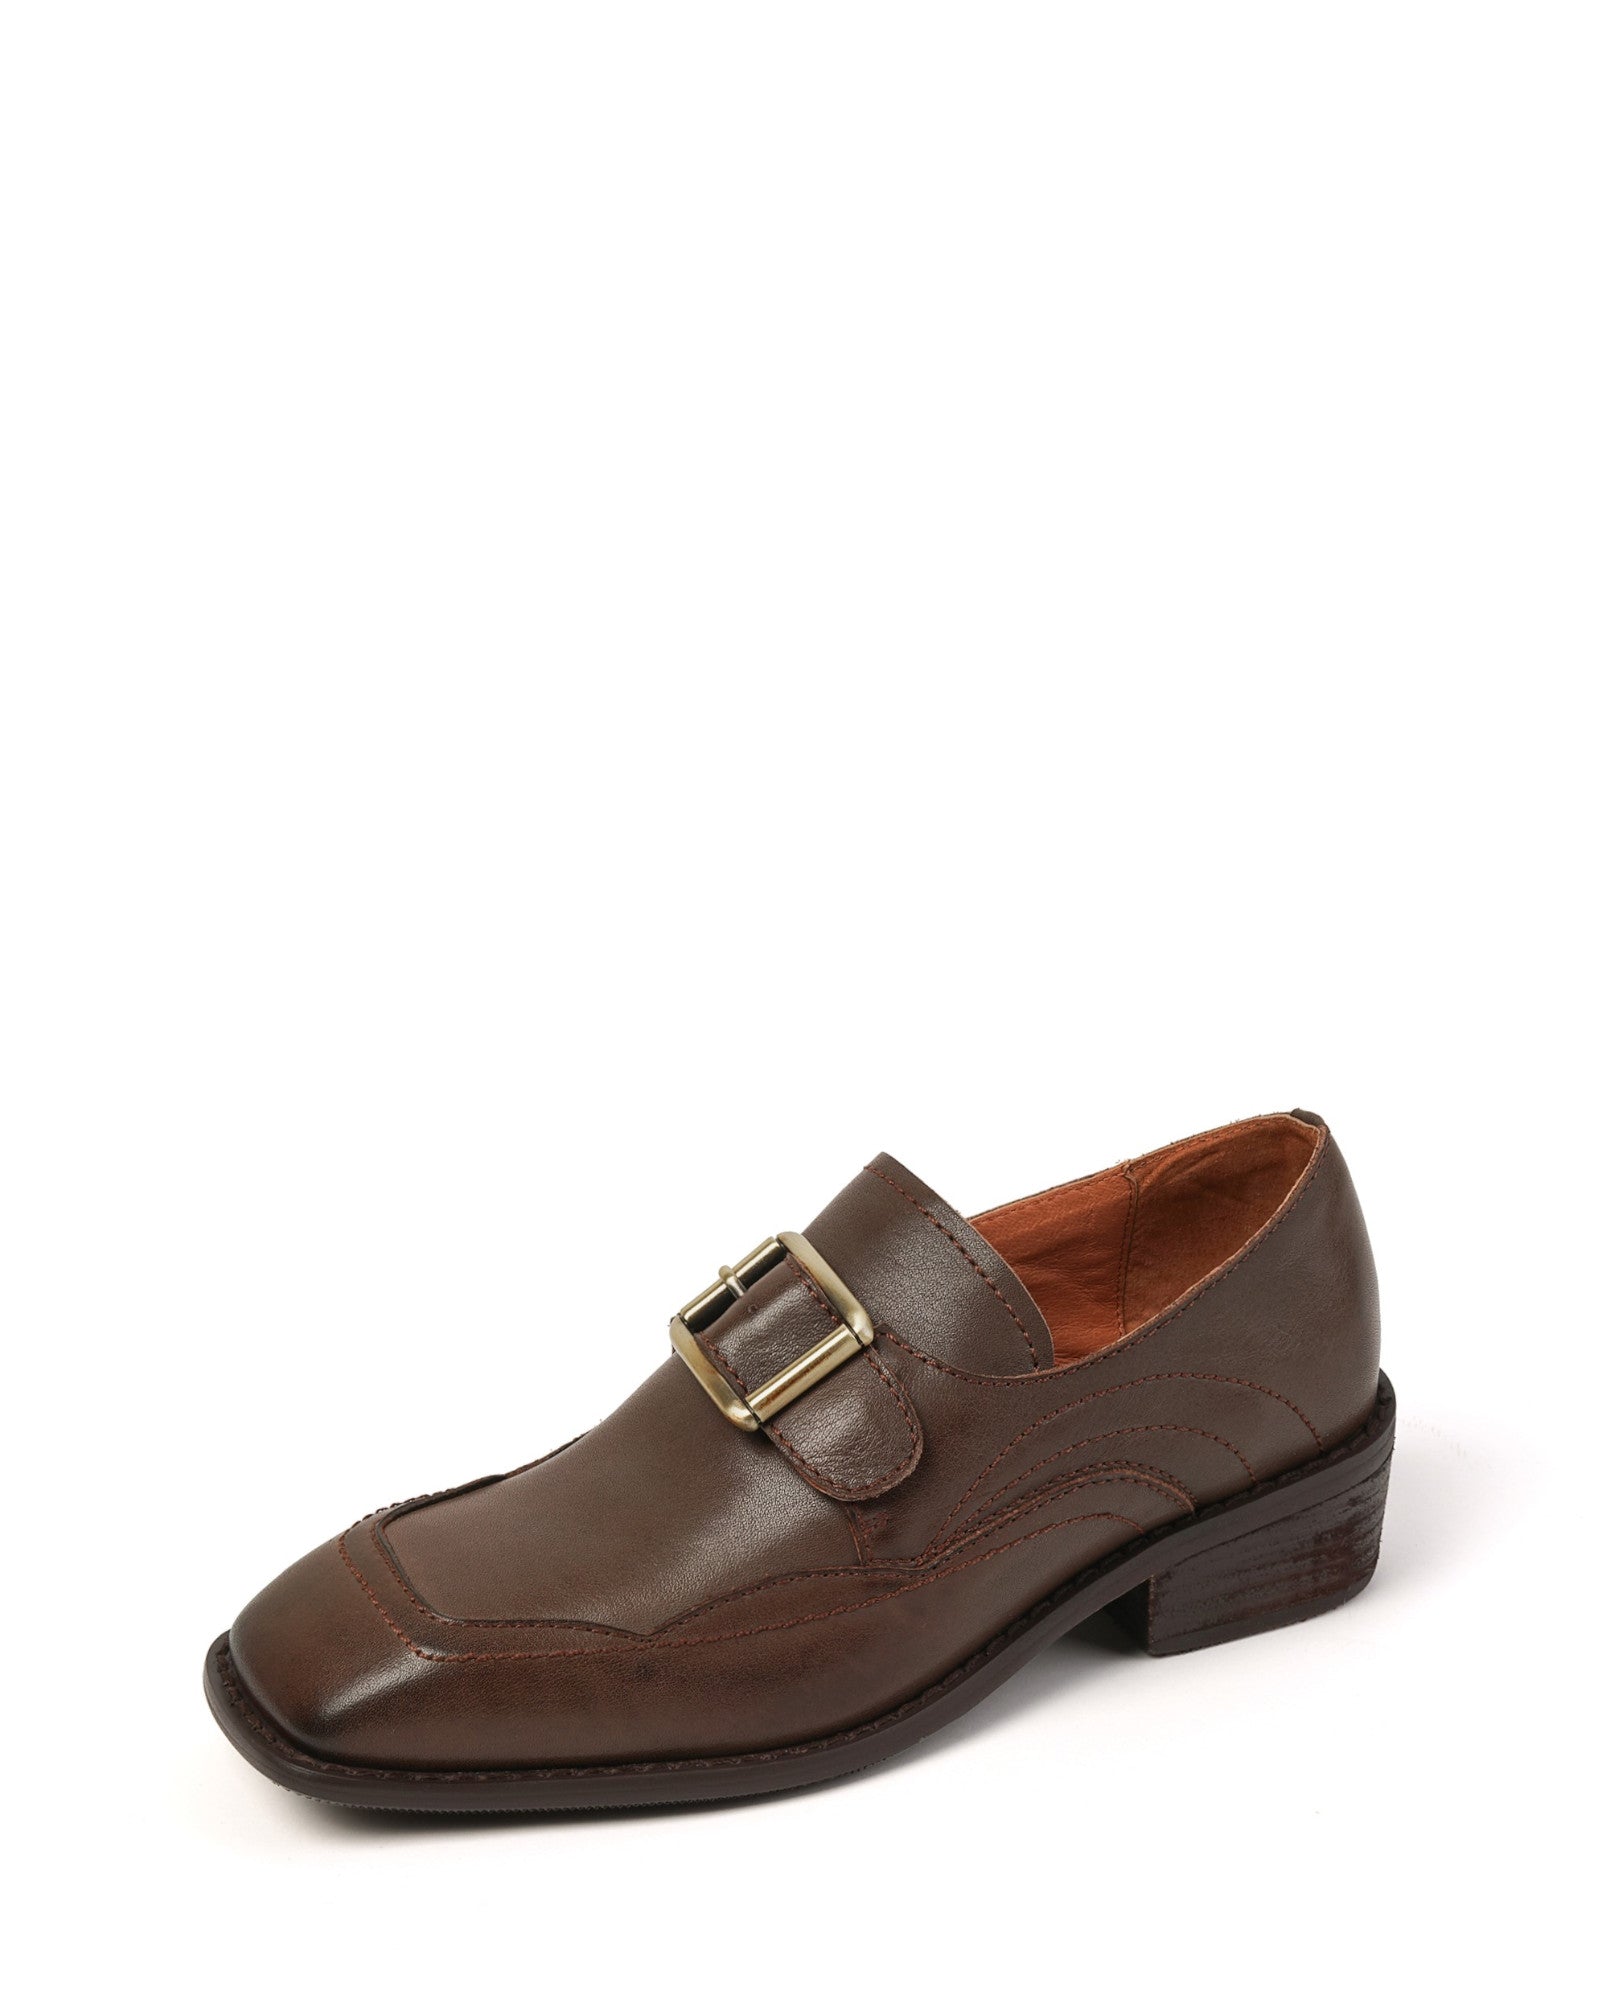 190-square-toe-brown-leather-loafers